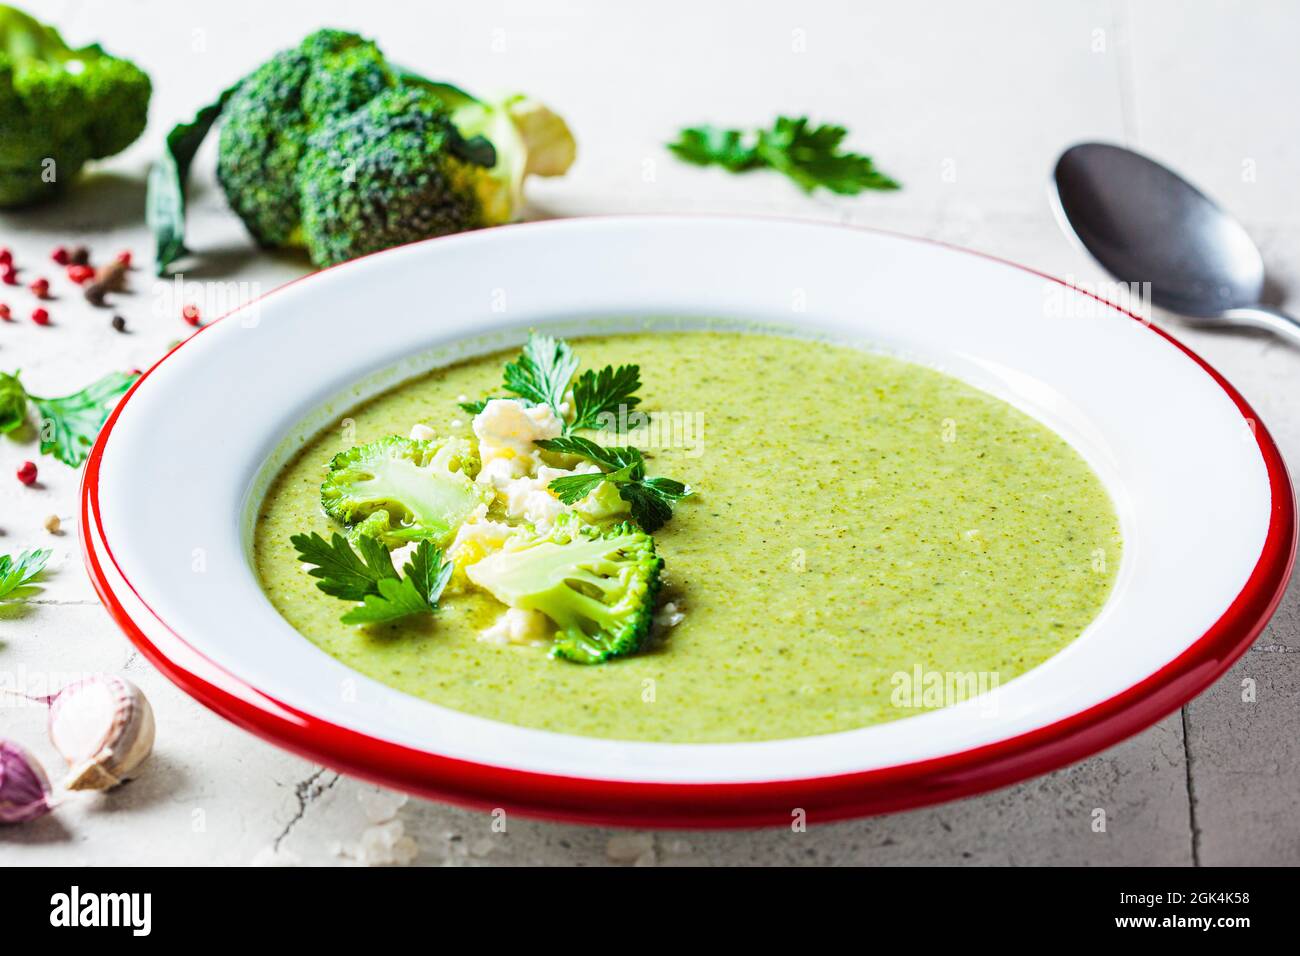 Broccoli soup puree with feta cheese in plate on gray tile background with ingredients. Cooking healthy food concept. Stock Photo